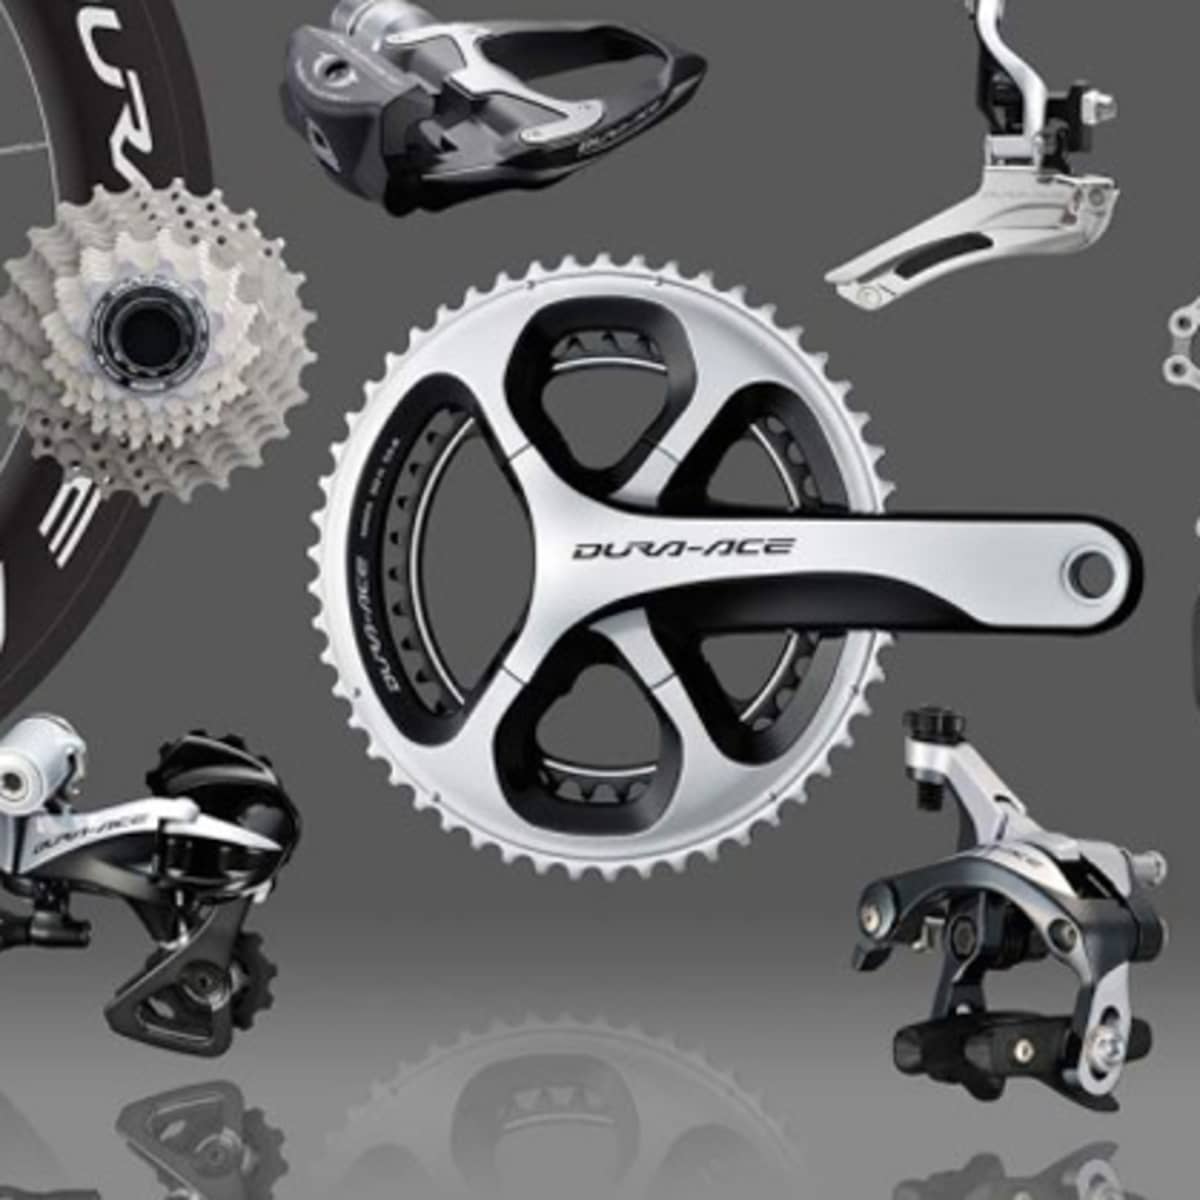 Shimano Dura-Ace 9000 Overview - BikeMag